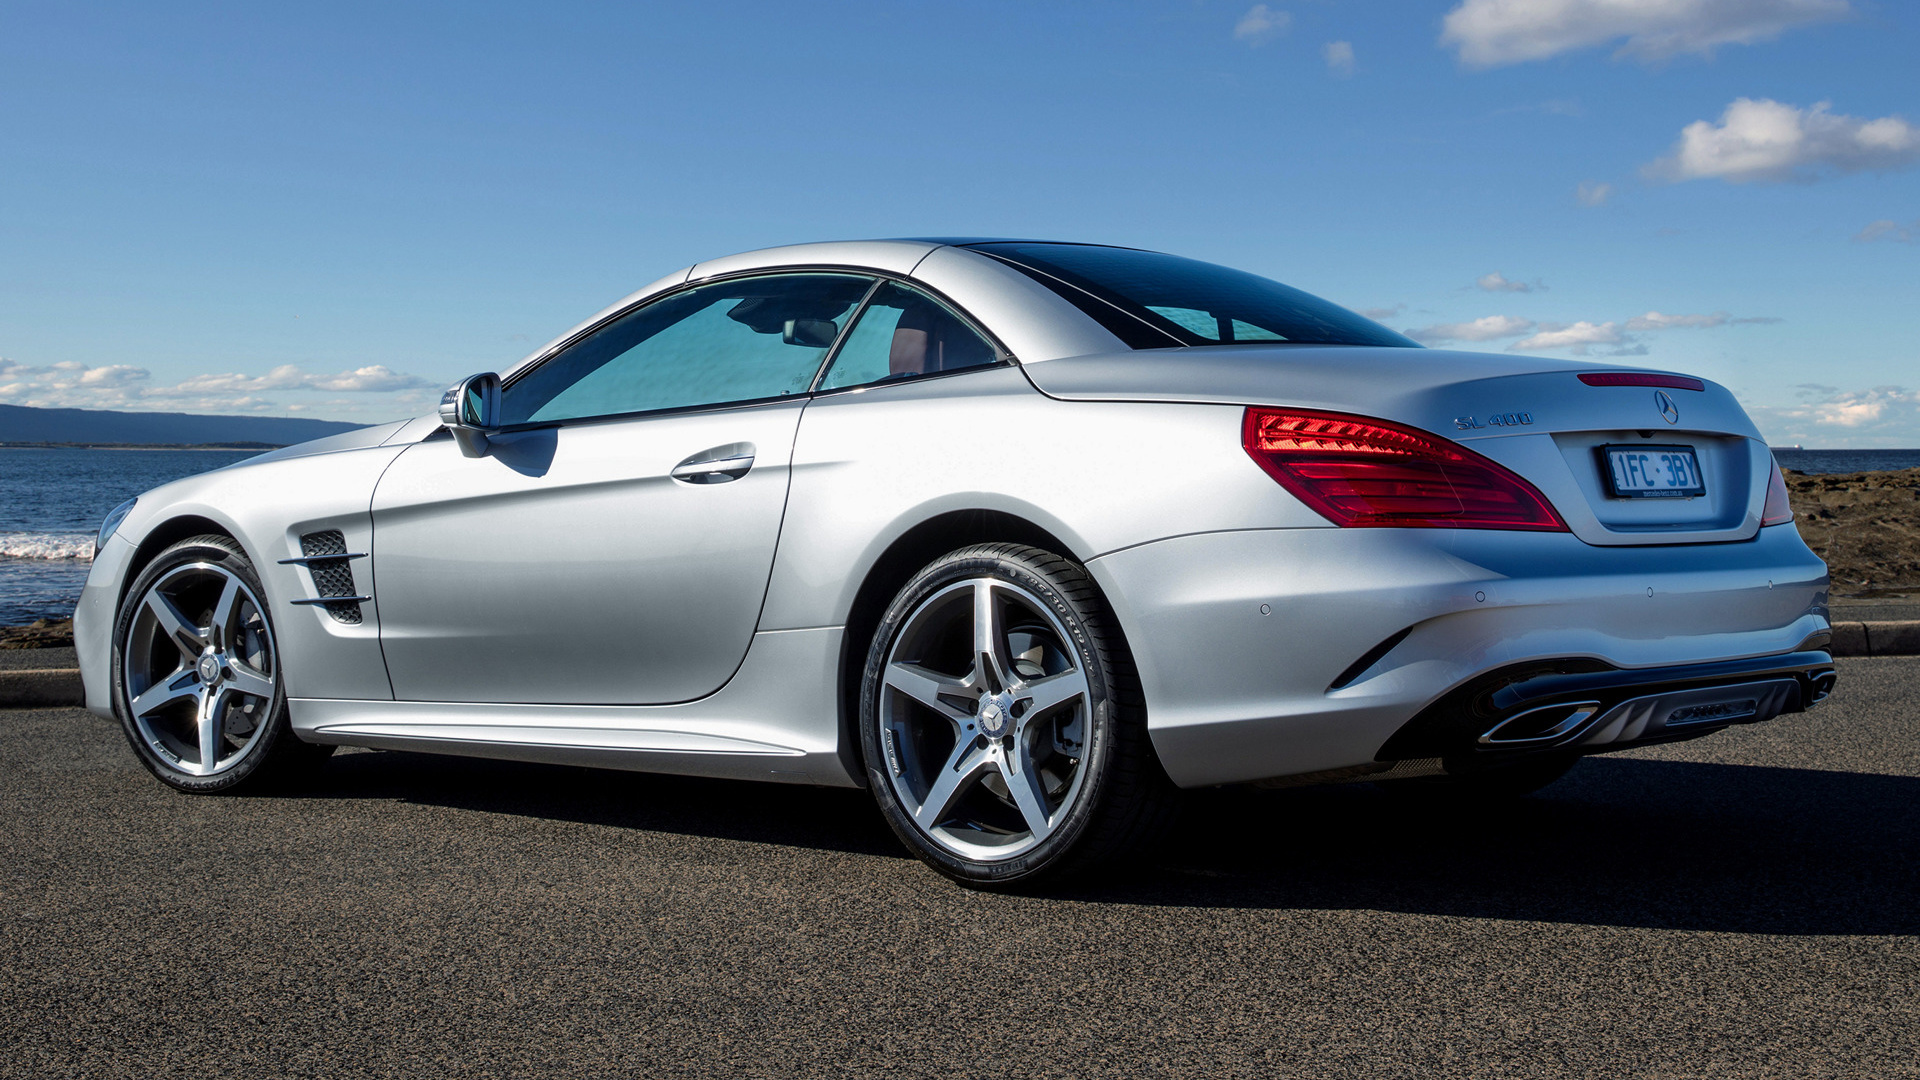 Mercedes Benz SL Class 2016 AU Wallpapers and HD Images